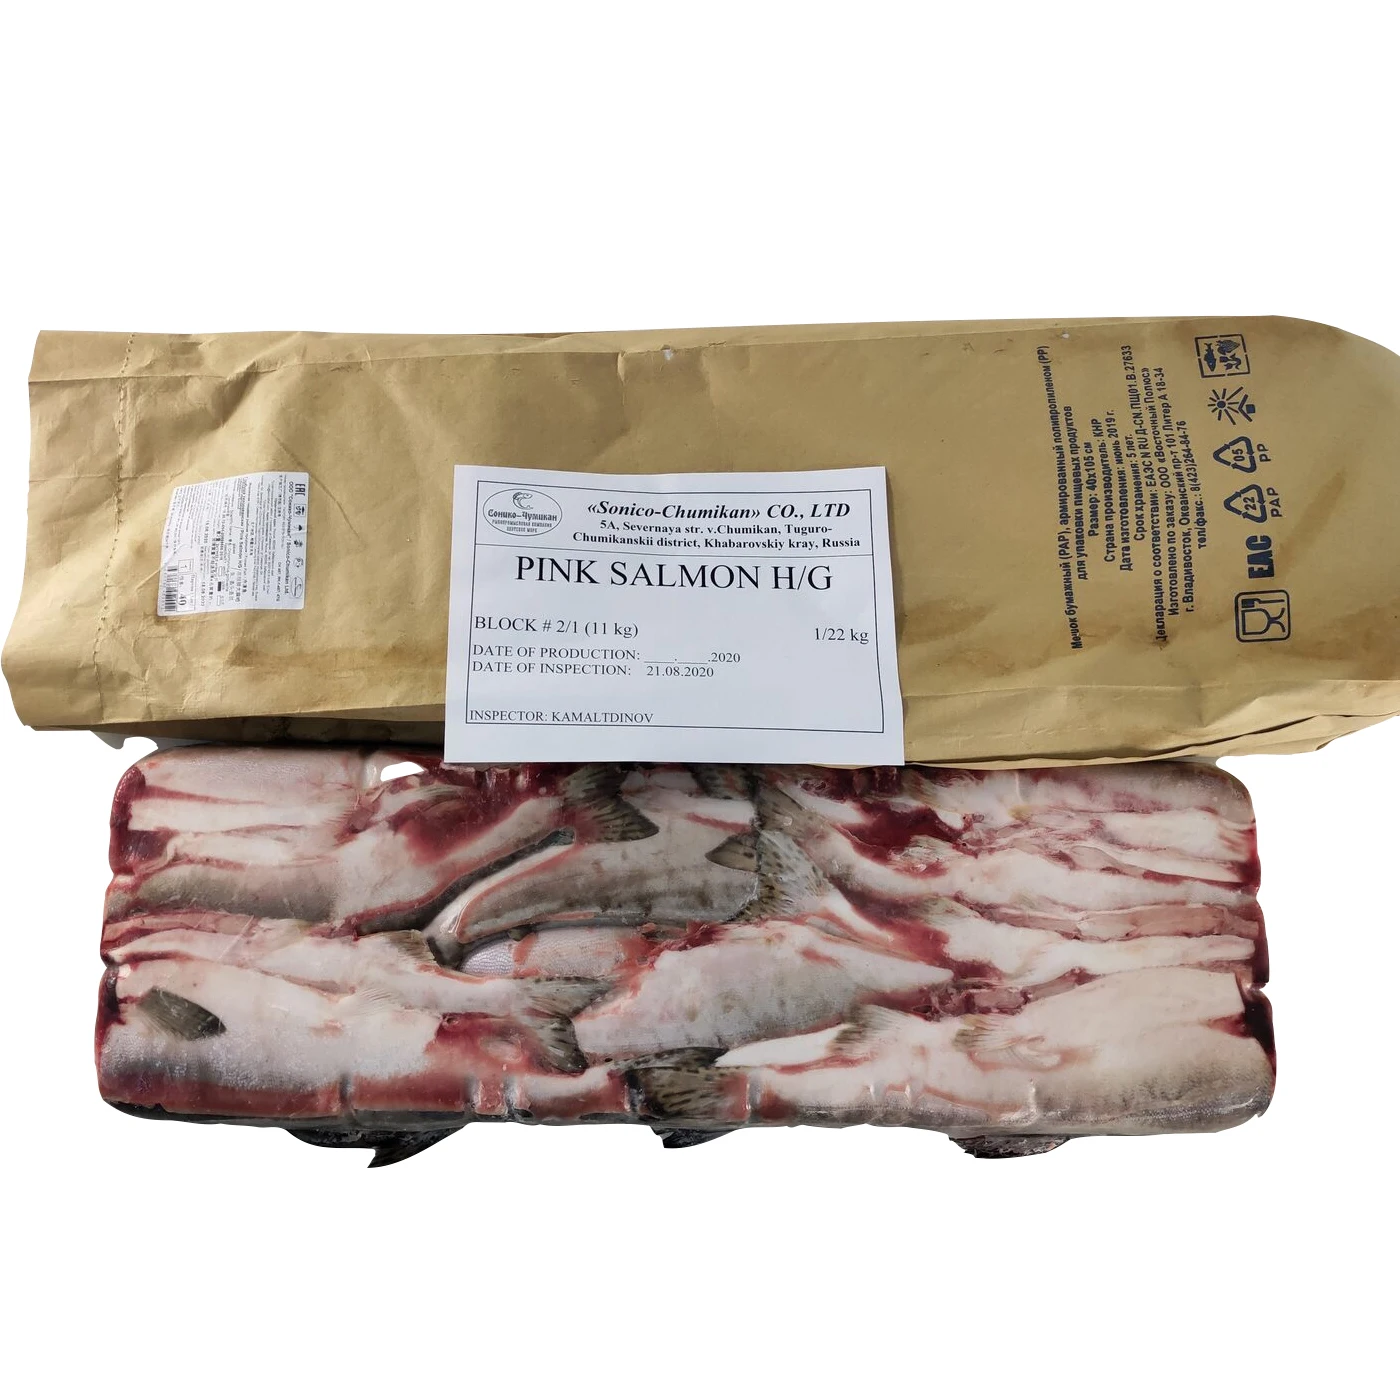 Frozen Pink Fish Food Products Seafood 1/22 kg Block Bag Packaging Oncorhynchus Gorbuscha Salmon Without Head (11000001059017)